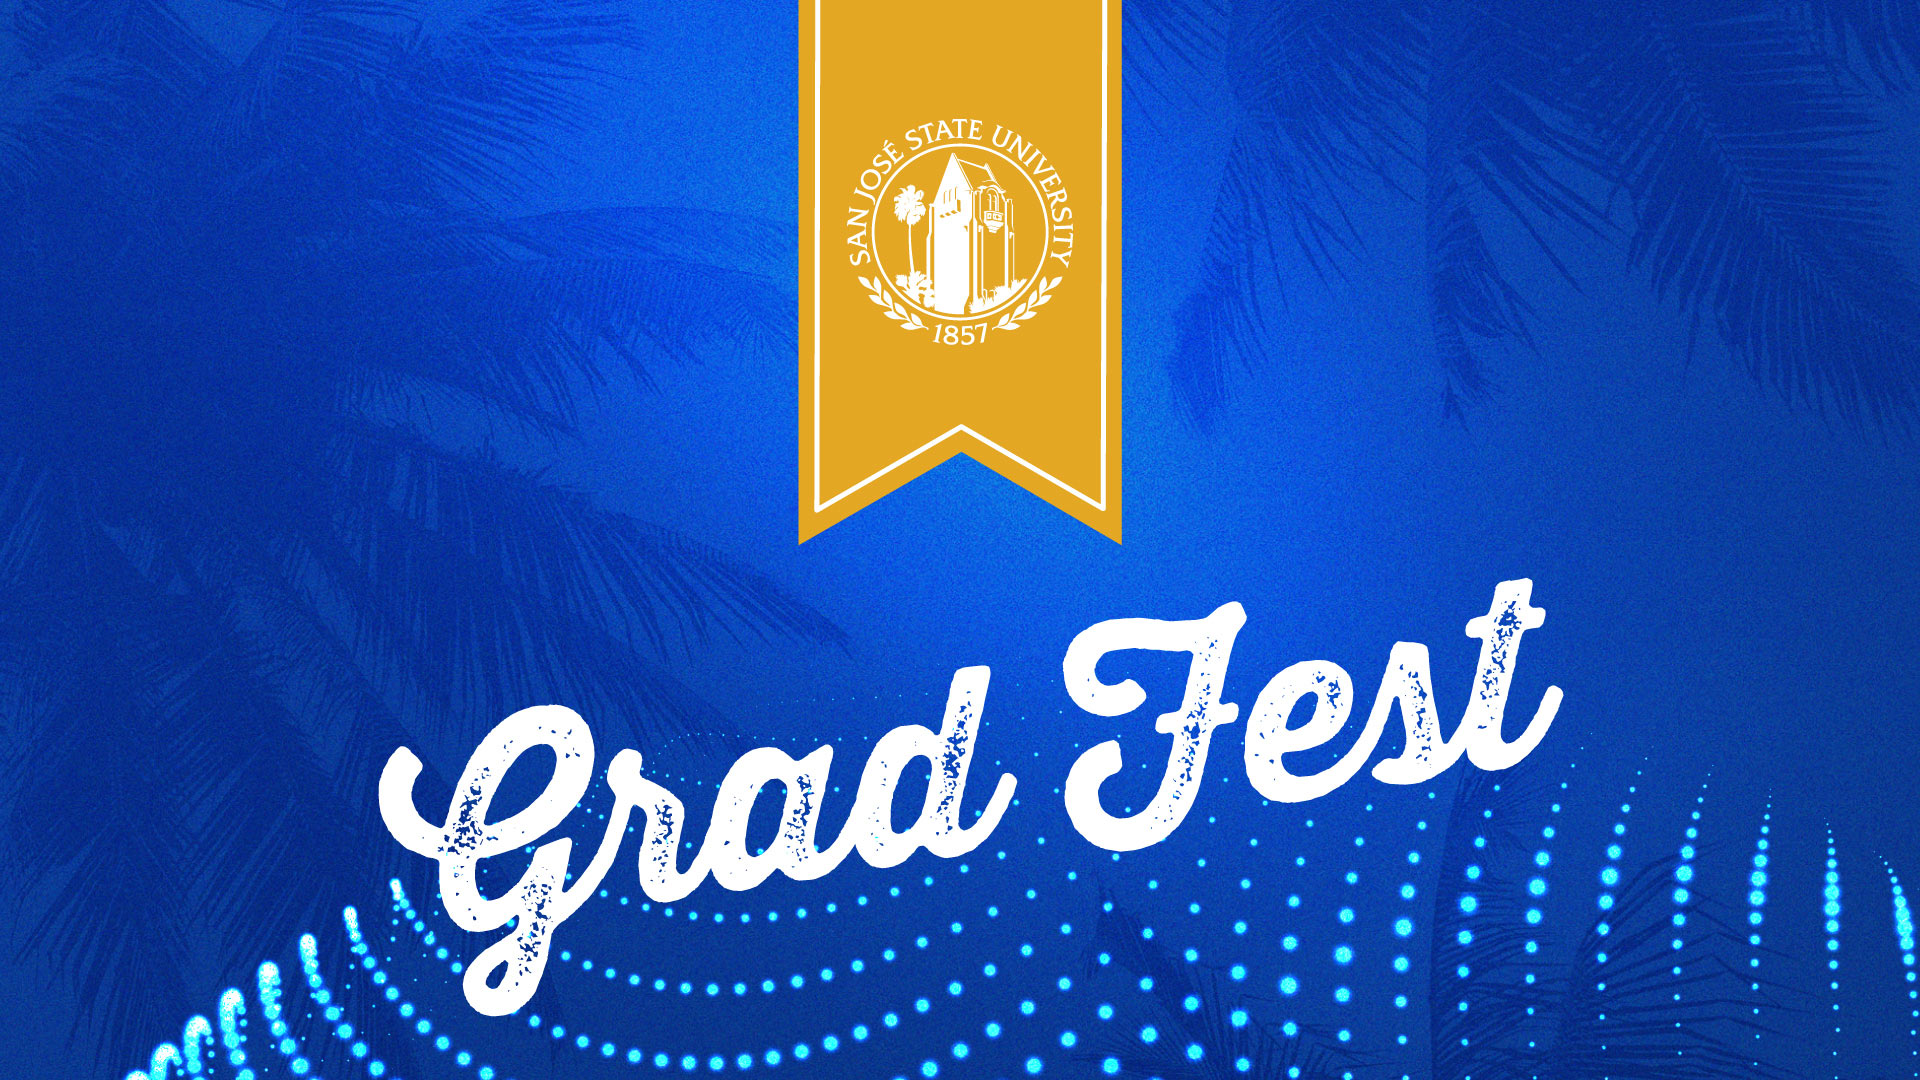 A gold banner with the SJSU seal and the words Grad Fest sits over a vibrant blue background with teal ribbons of dots and shadows of palm trees.